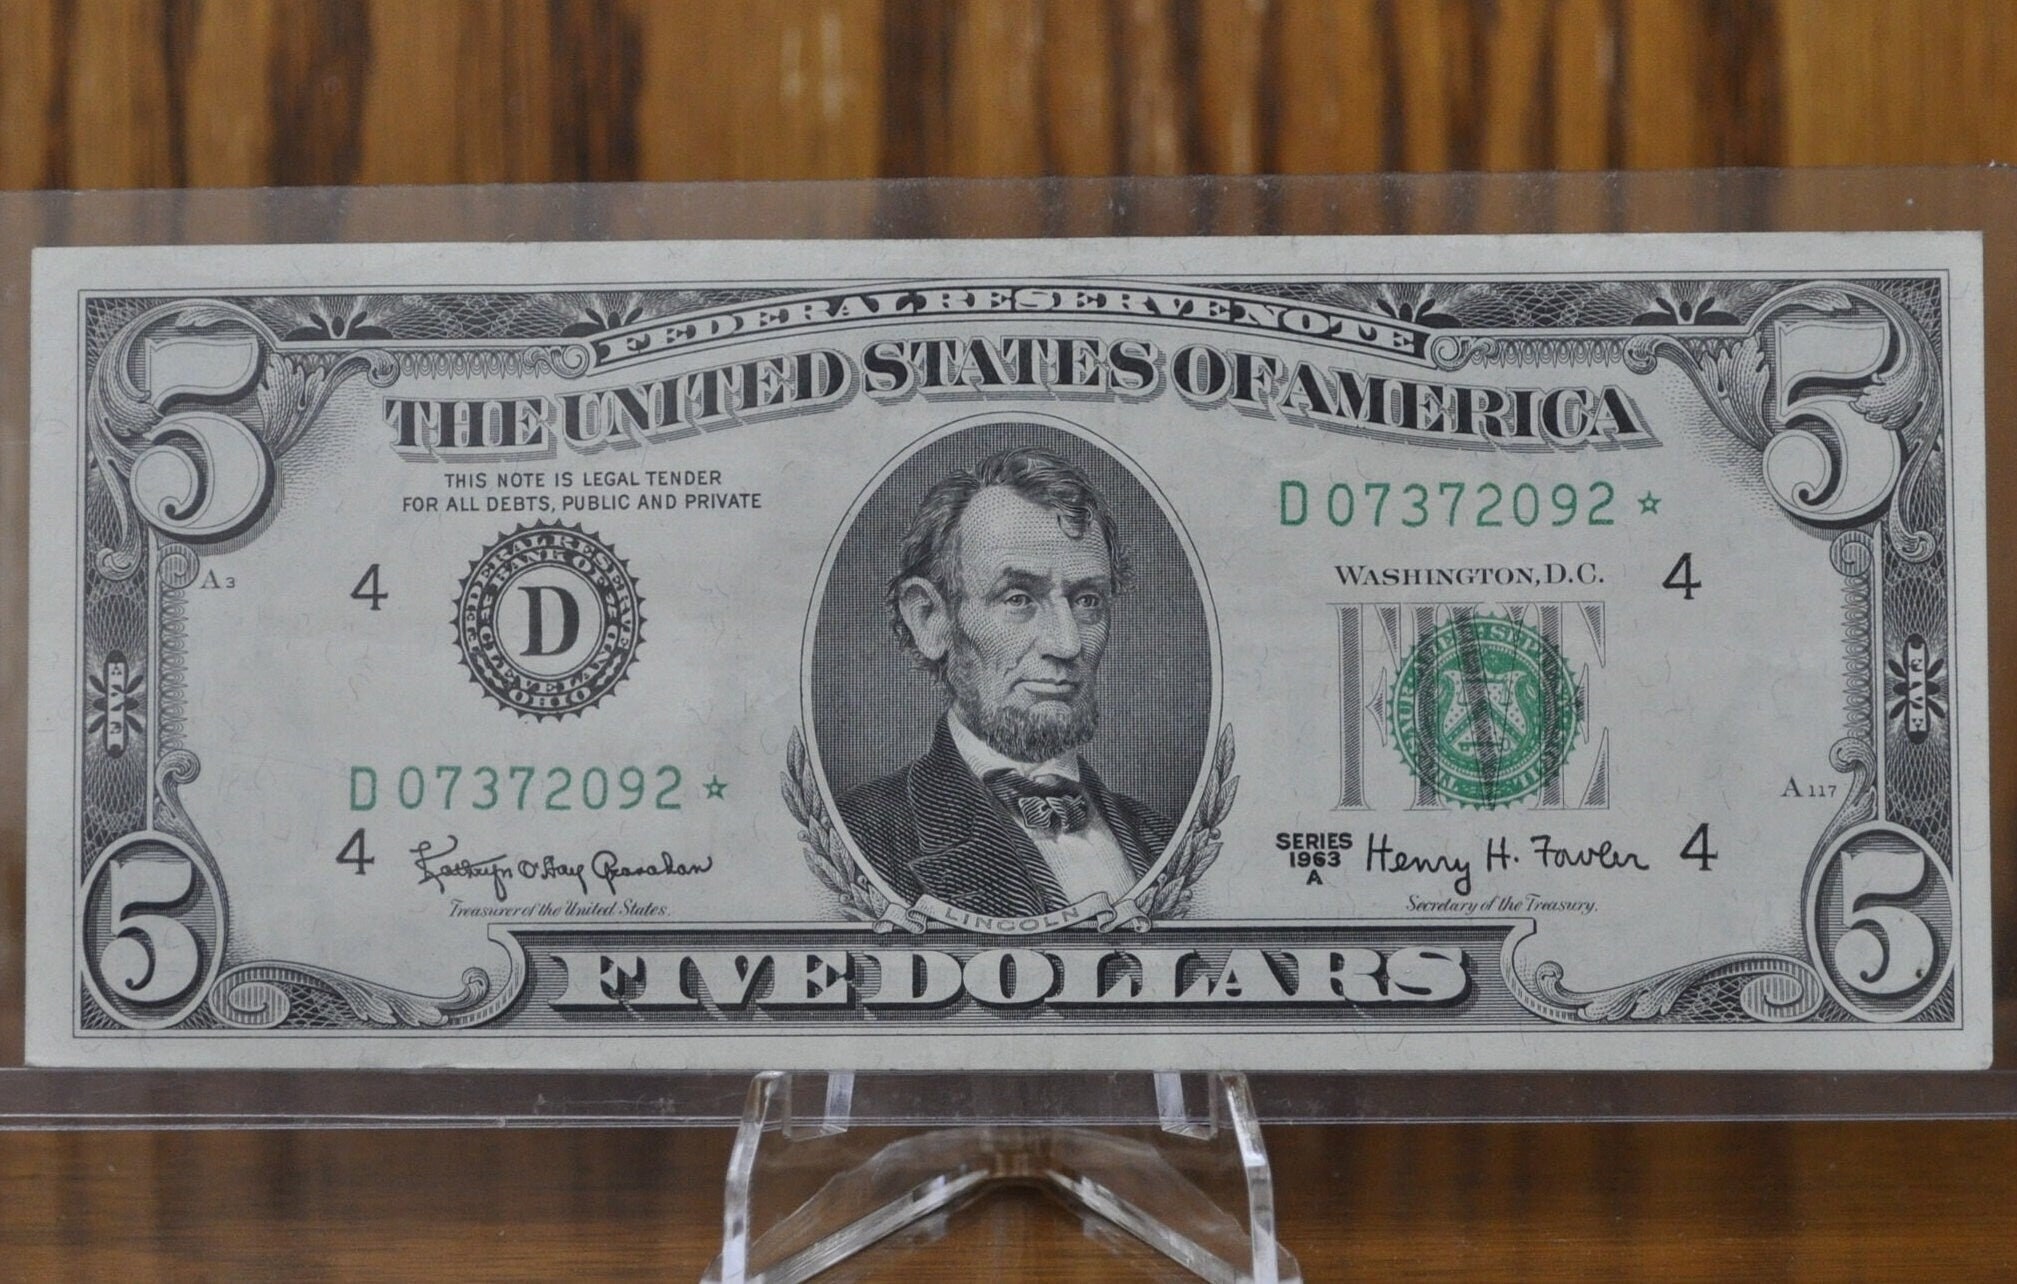 (5) New US $5 Five Dollar Bill Consecutive Serial number # Uncirculated